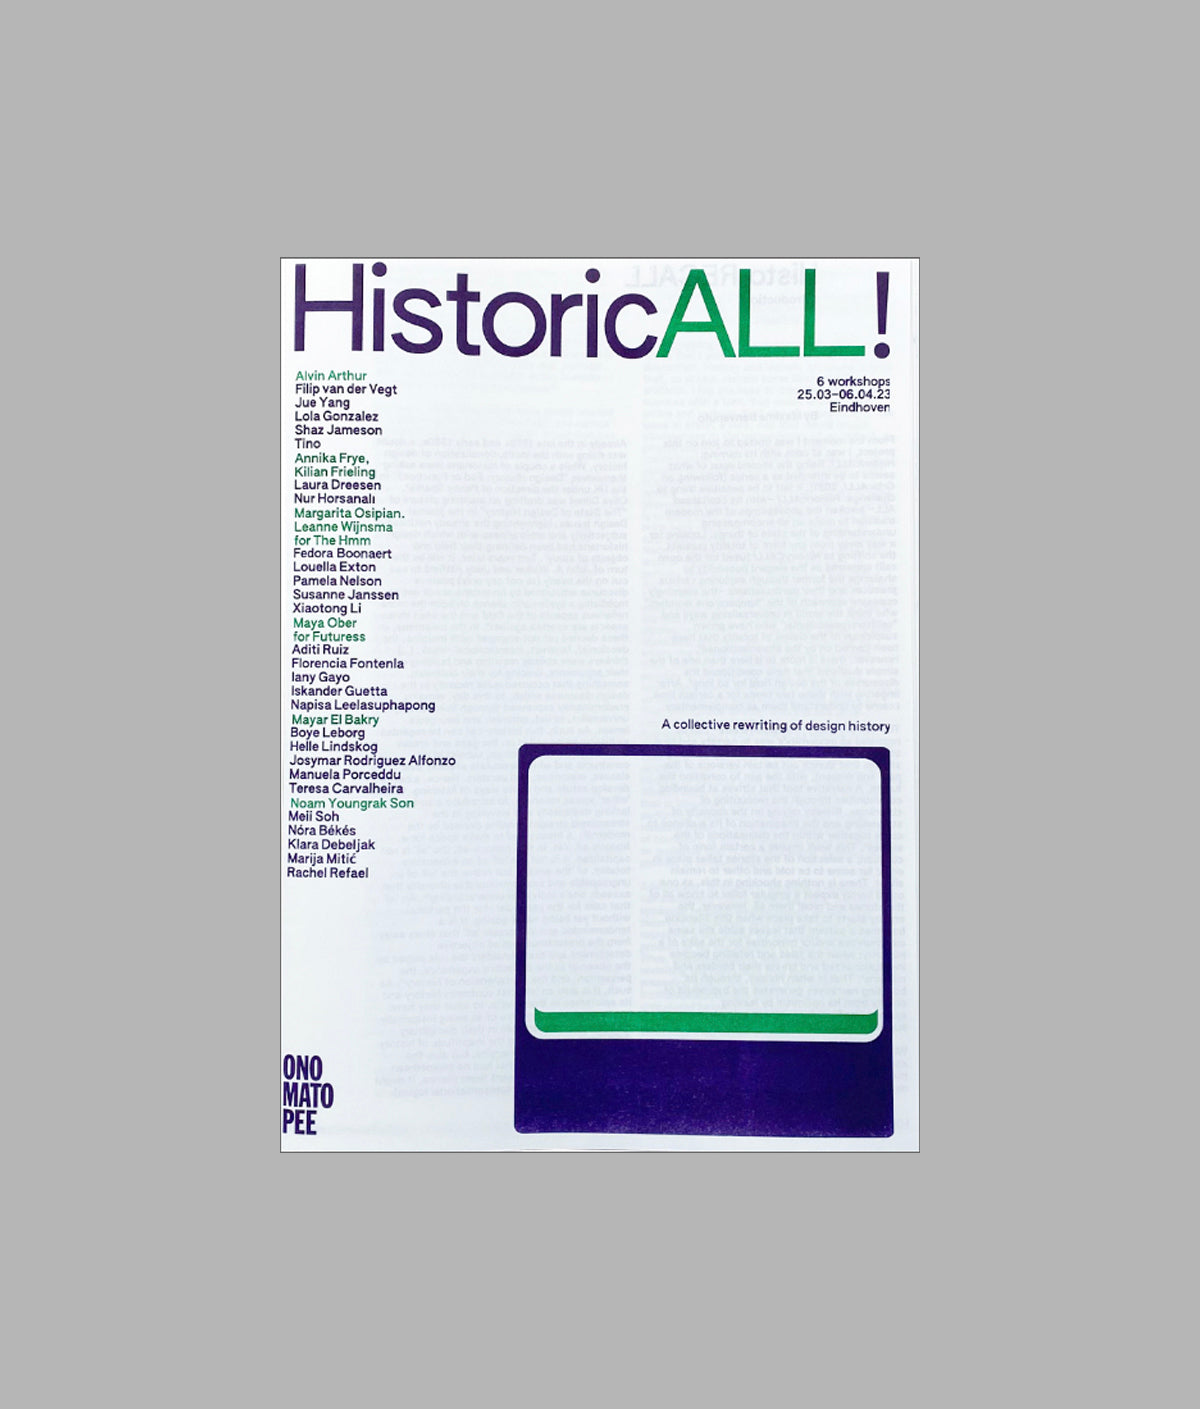 HistoricALL! A collective rewriting of design history